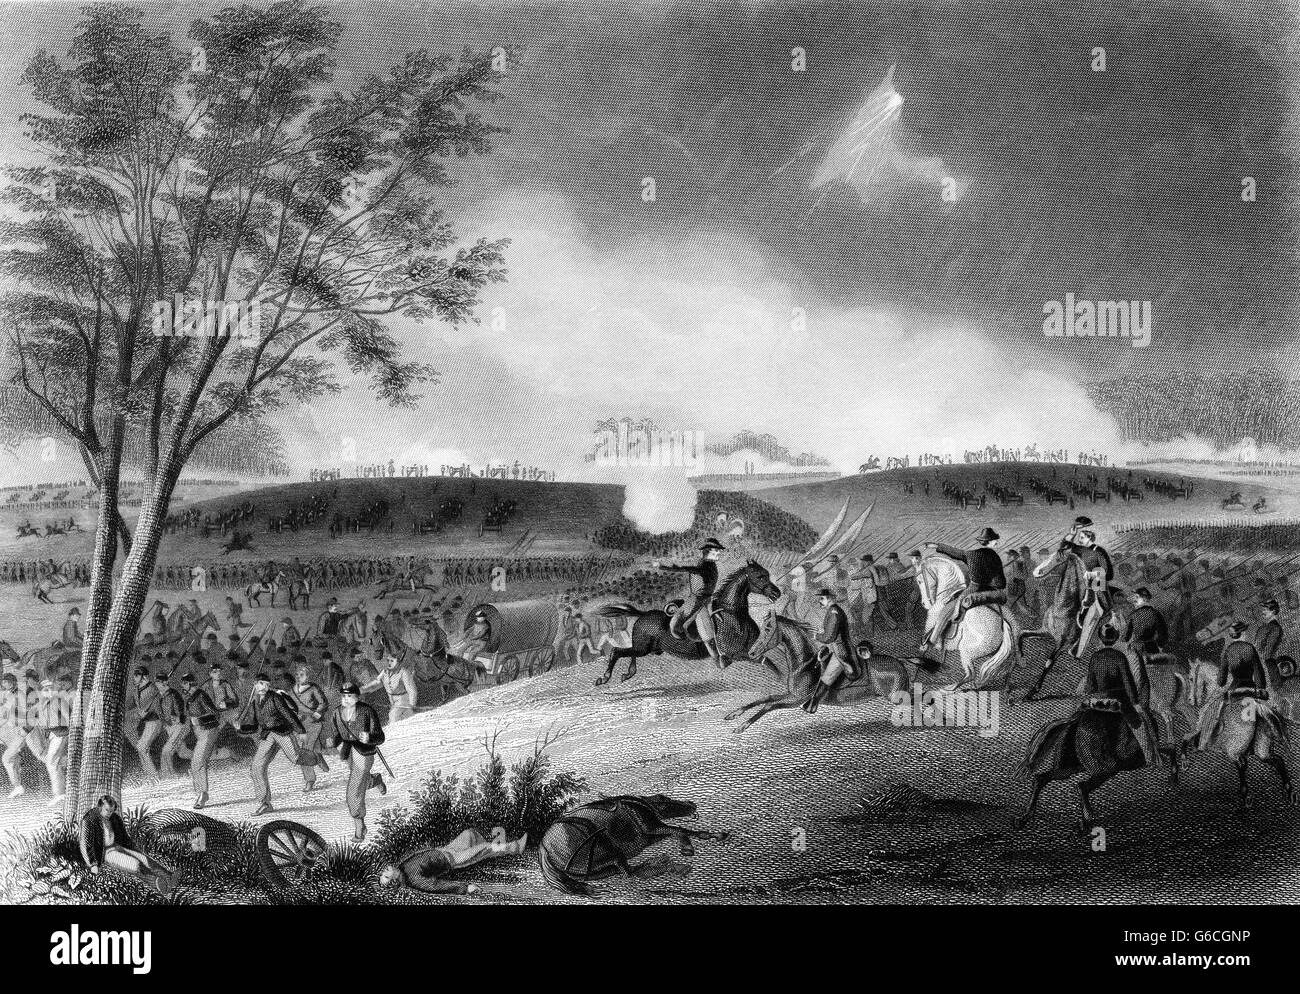 1860s MAY 1863 GENERAL SICKLES COVERING THE RETREAT OF UNION FORCES BATTLE OF CHANCELLORSVILLE SPOTSYLVANIA COUNTY VIRGINIA USA Stock Photo